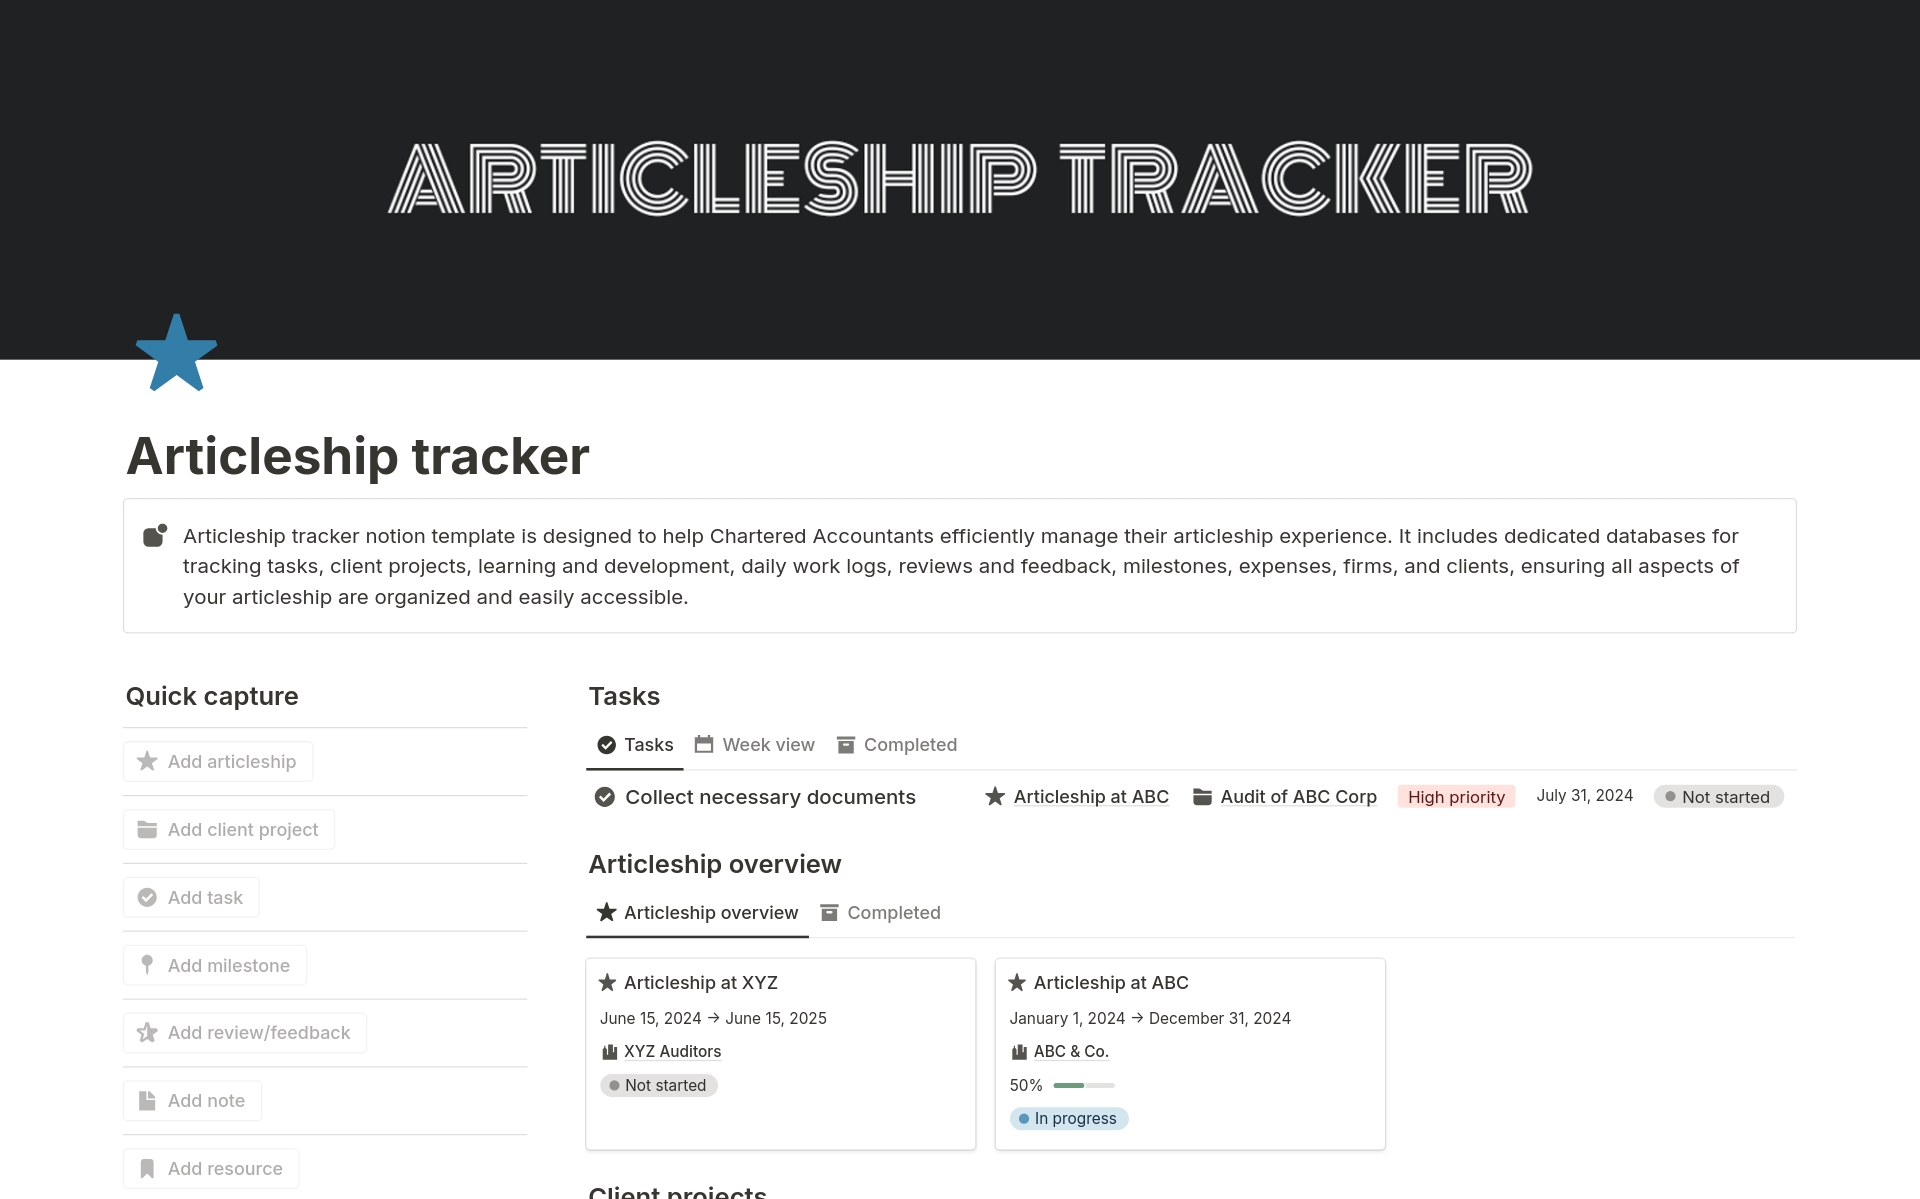 Articleship tracker notion template is designed to help Chartered Accountants efficiently manage their articleship experience.